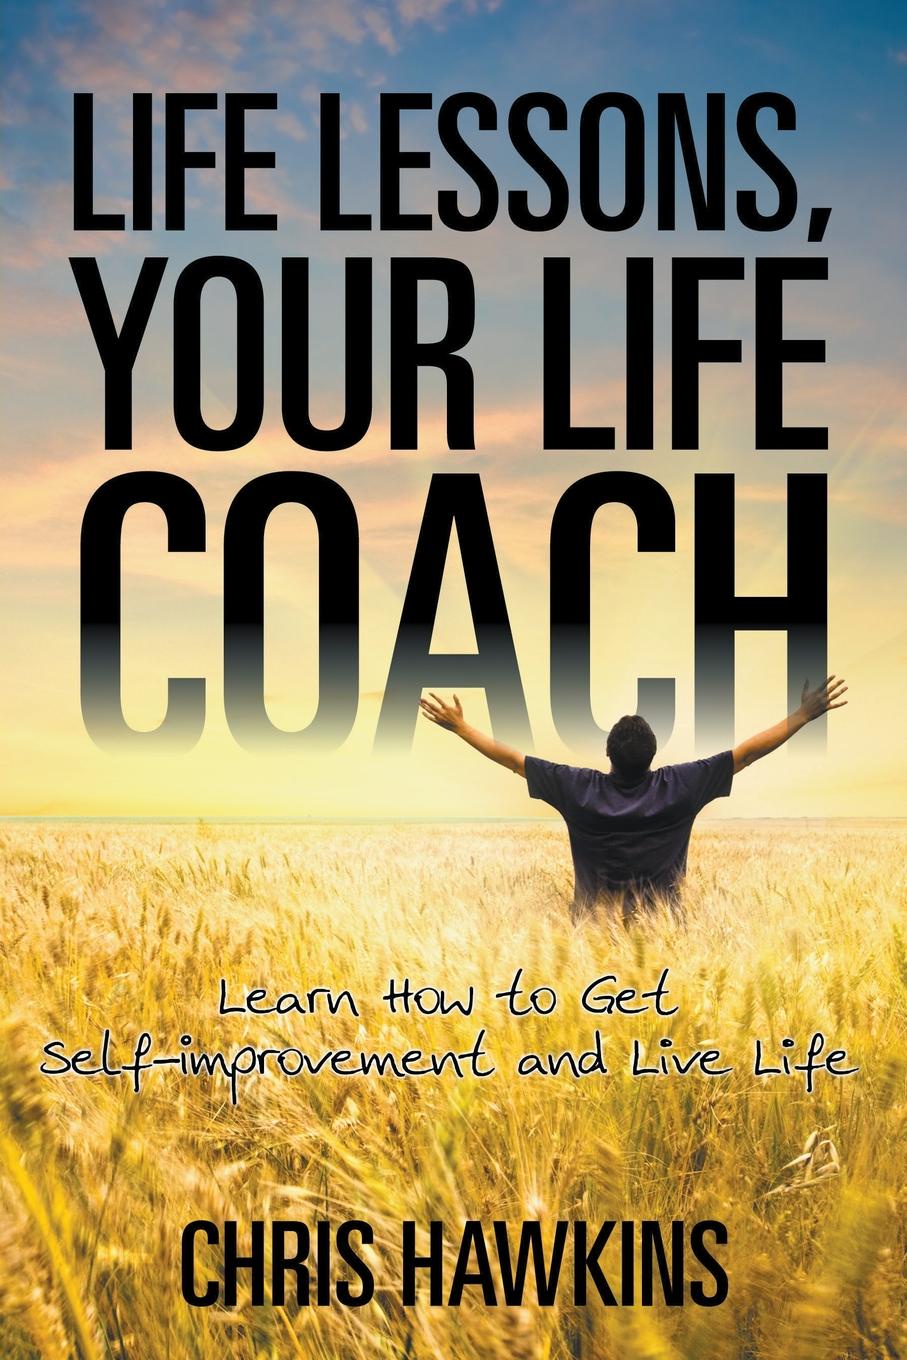 Life Lessons, Your Life Coach. Learn How to Get Self-Improvement and Live Life